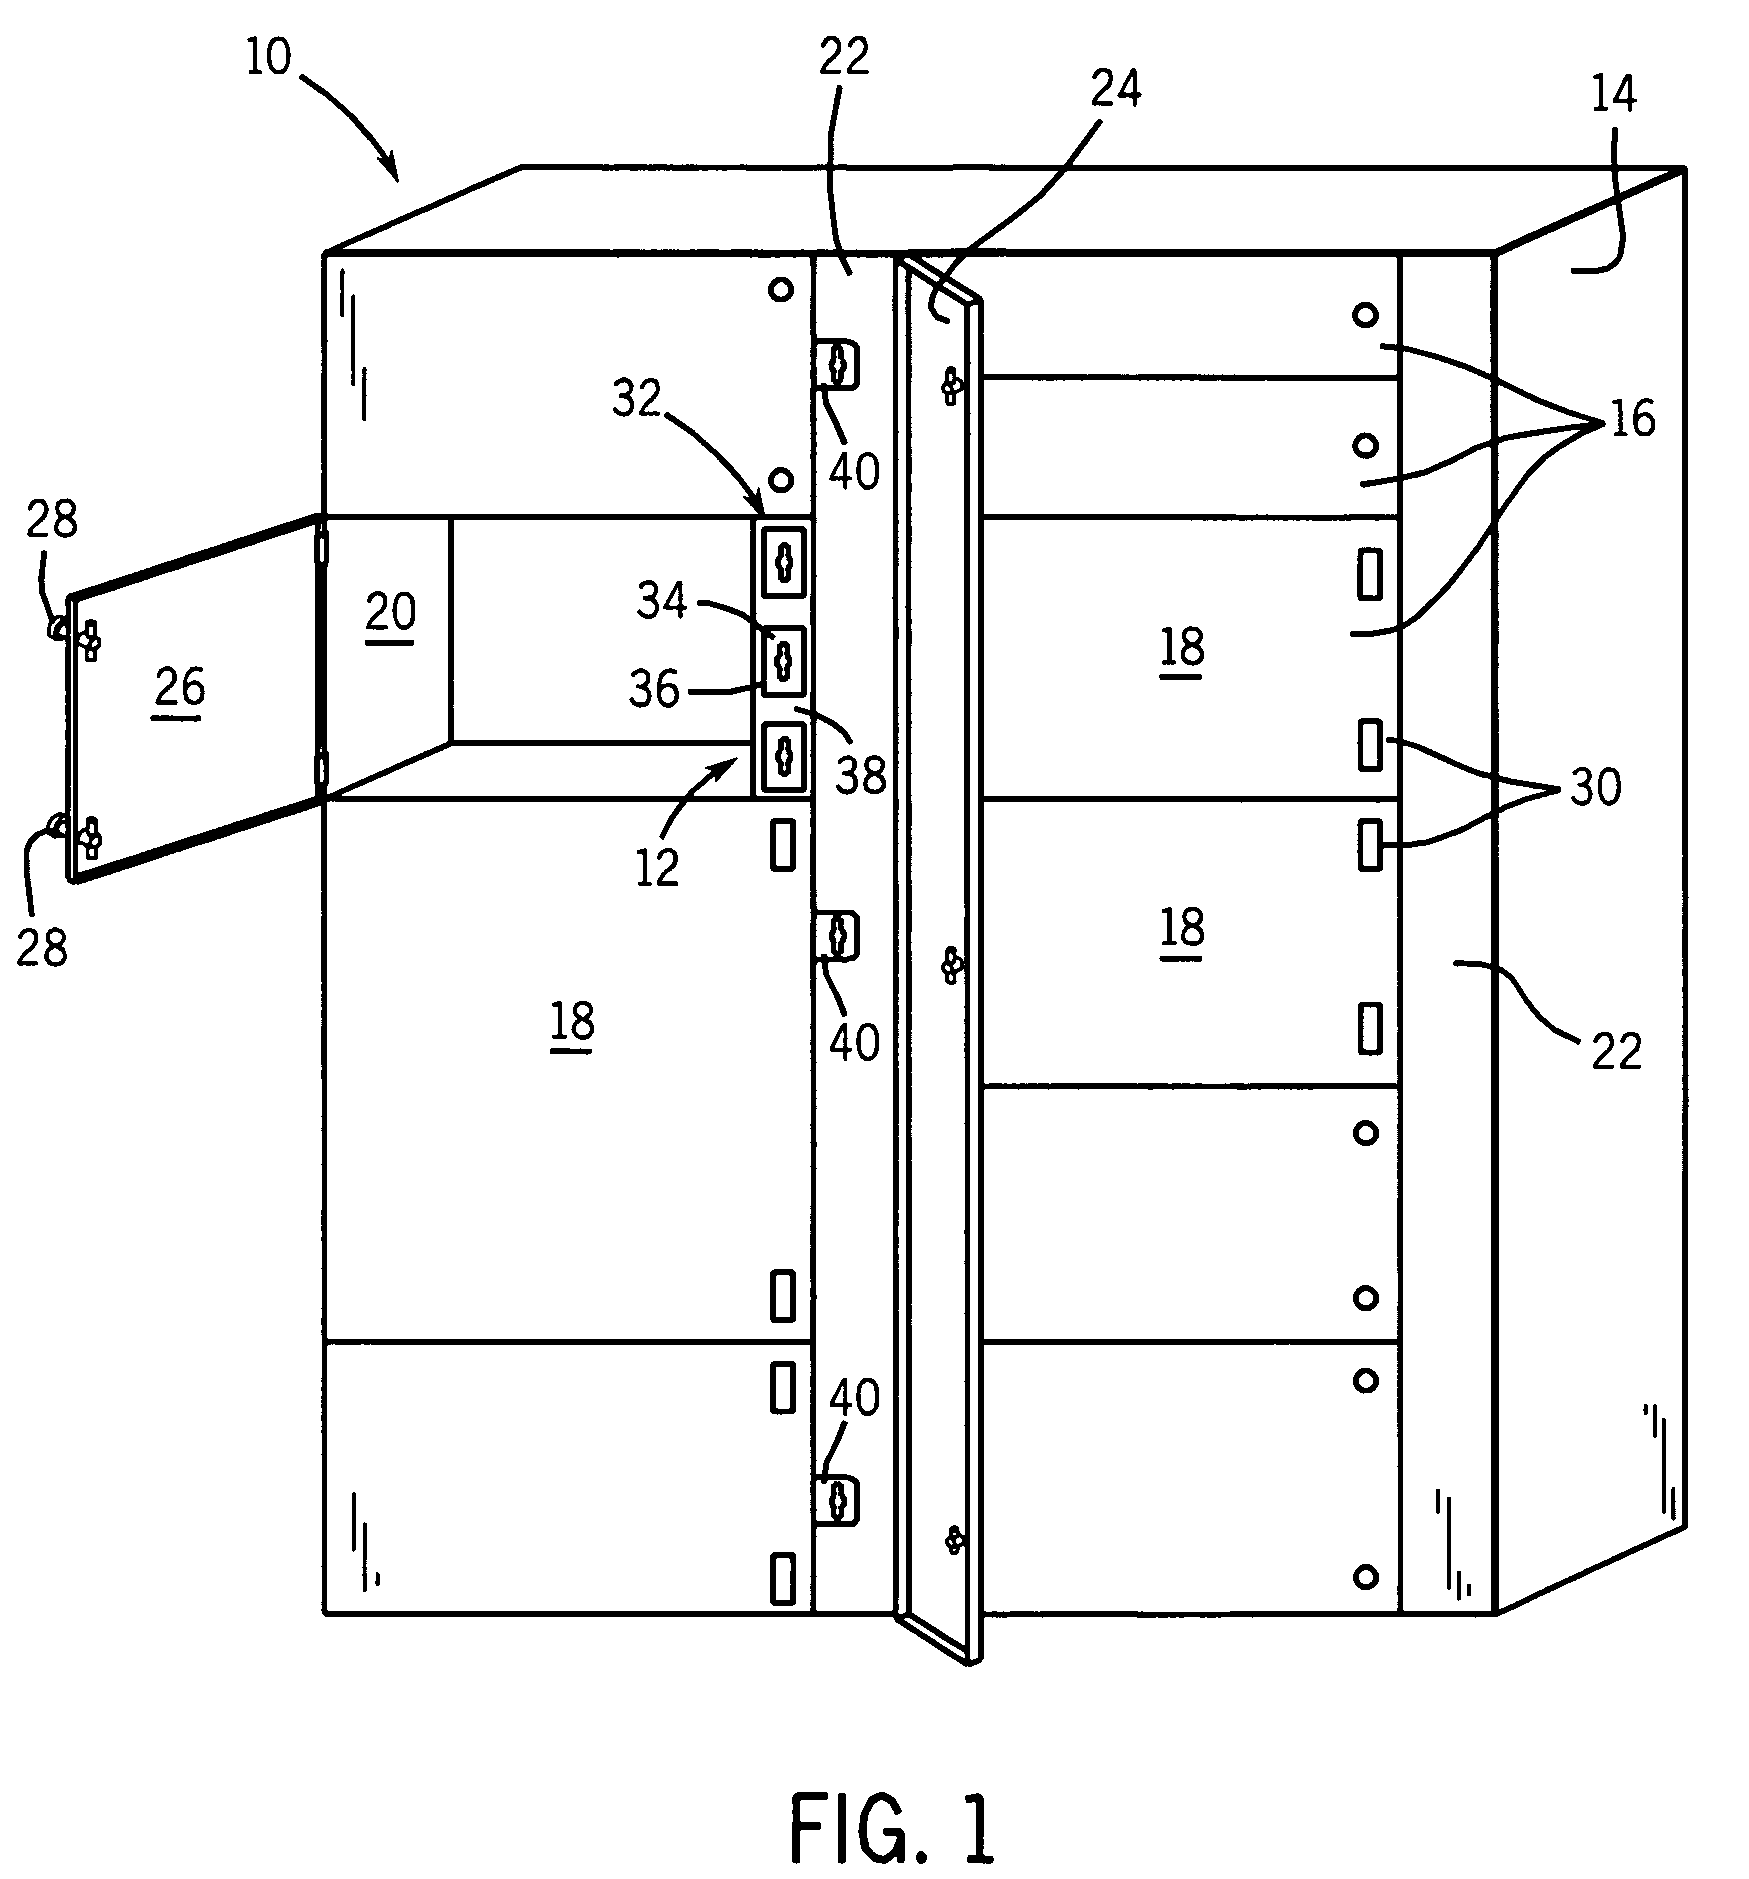 Common structure and door for multiple door electrical enclosure latching systems